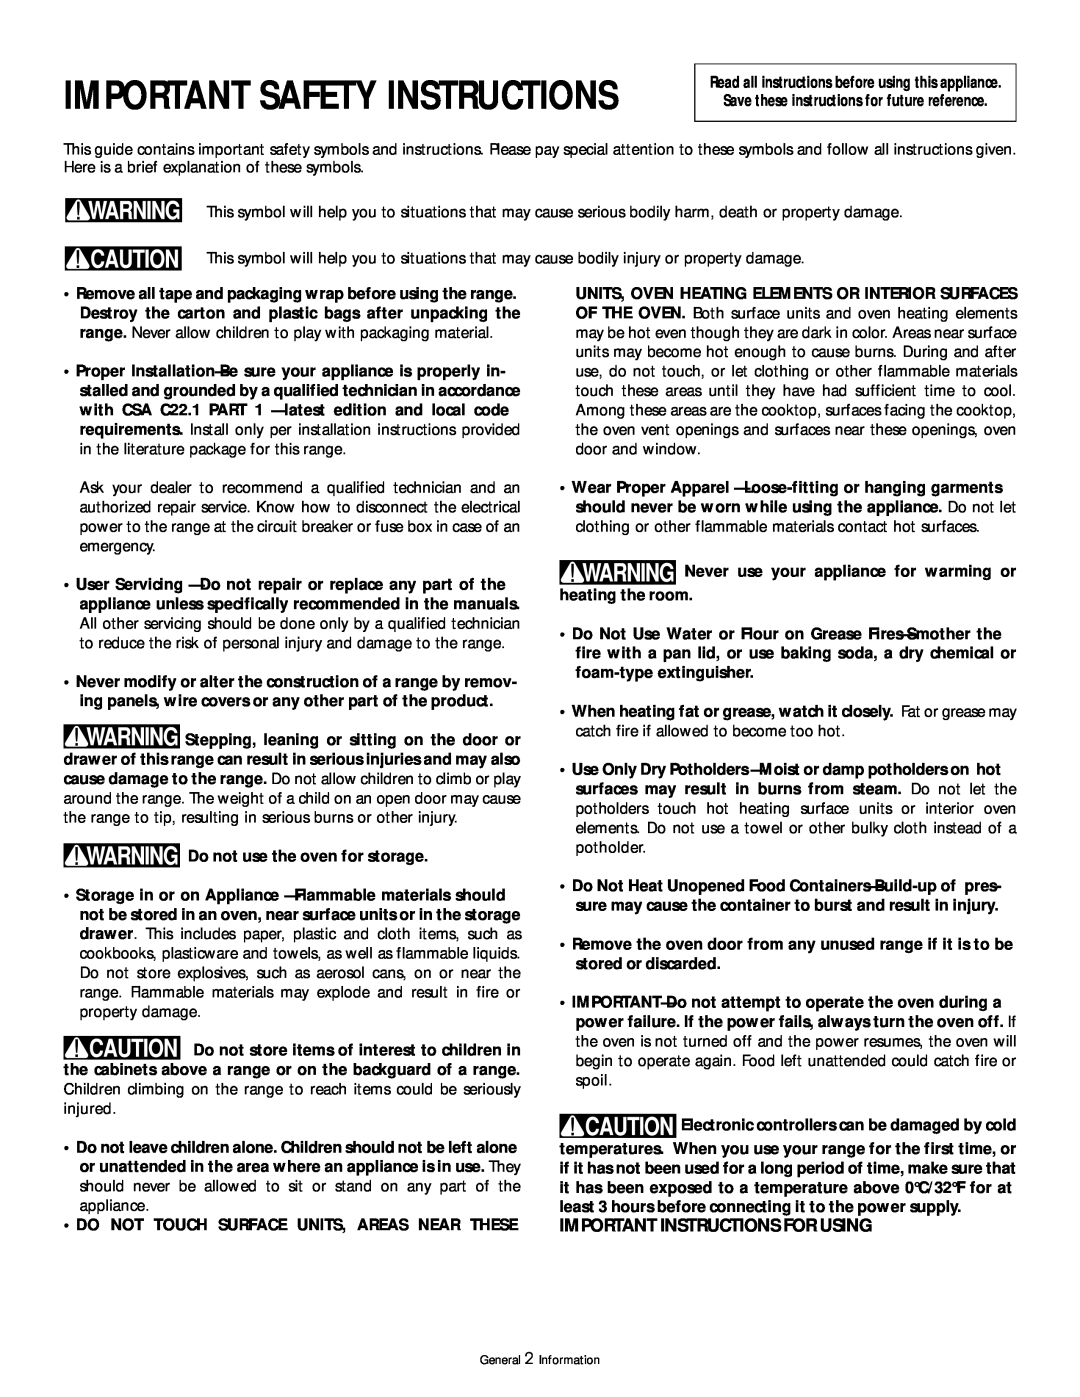 Tappan 318200409 warranty Important Instructions For Using, Important Safety Instructions, Do not use the oven for storage 